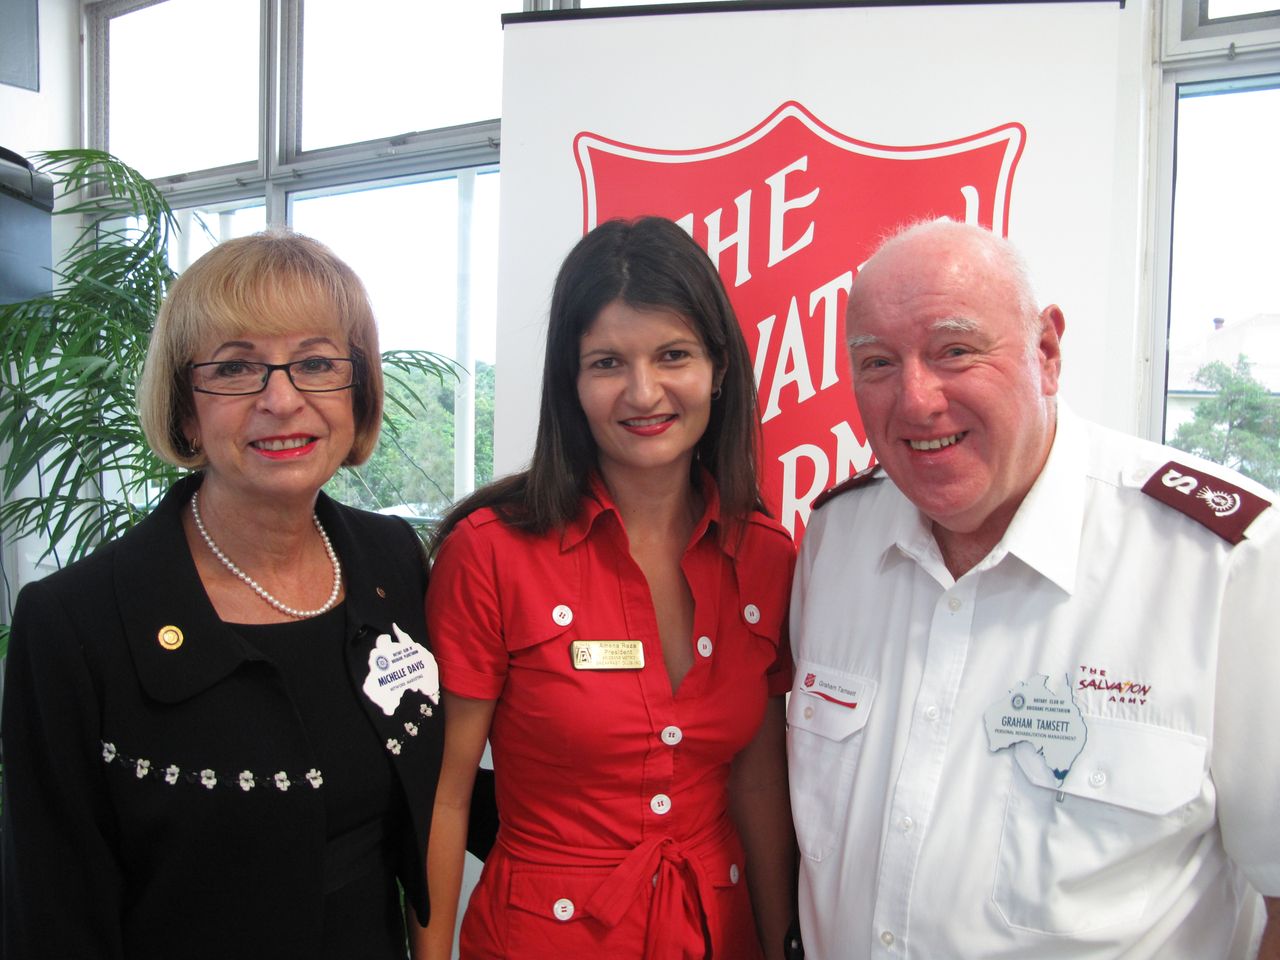 Teamwork – Rotary, Zonta and the Salvation Army co-operated in the fundraising effort